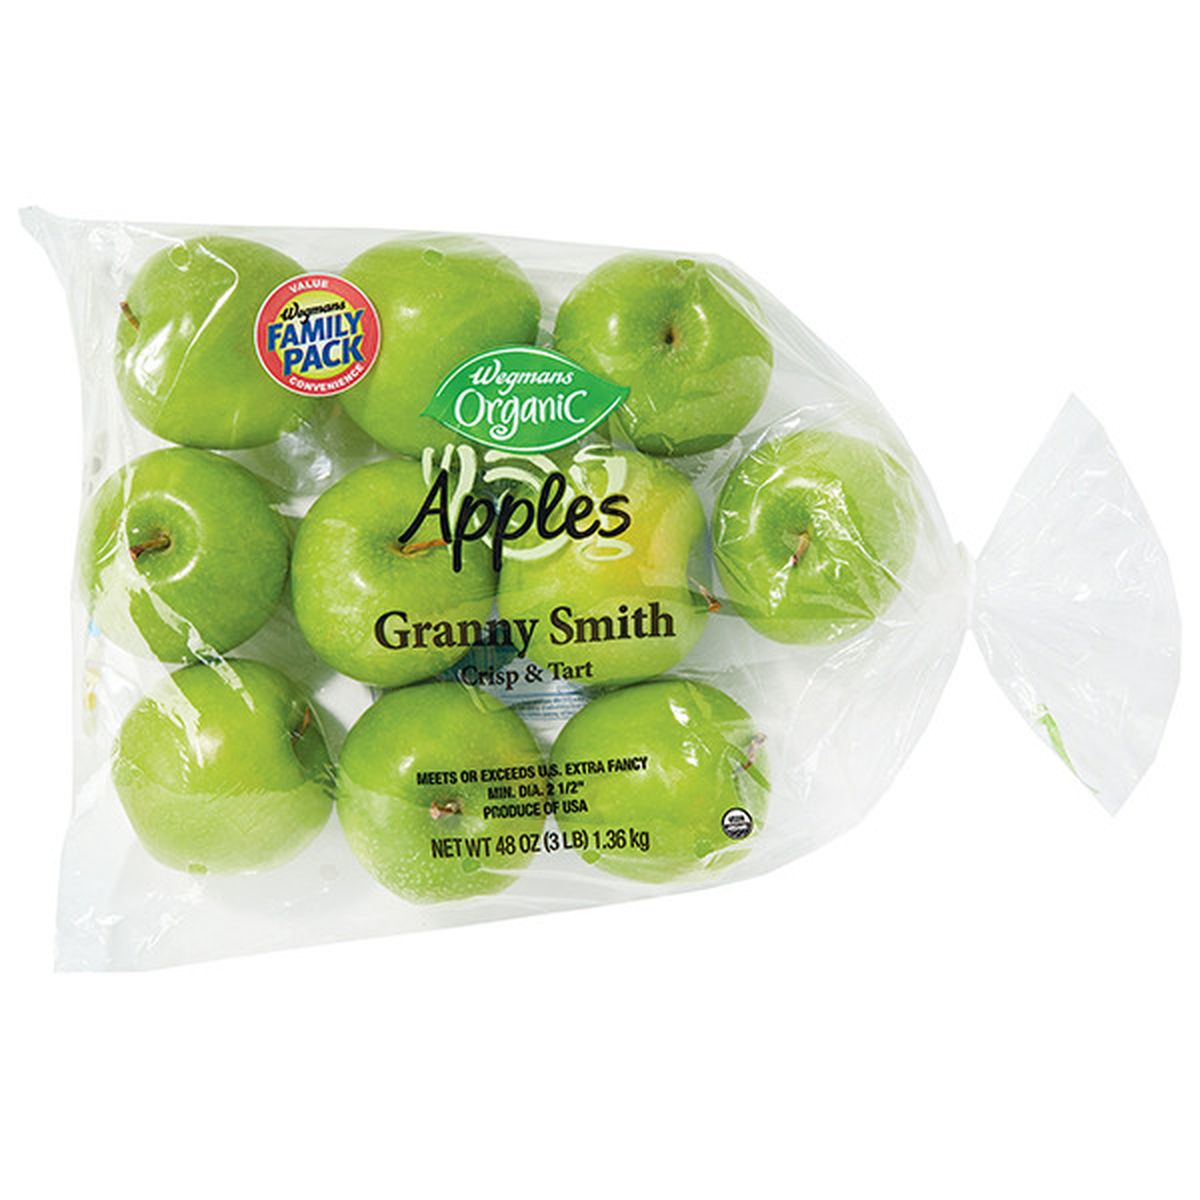 Calories in Wegmans Organic Bagged Granny Smith Apples, FAMILY PACK